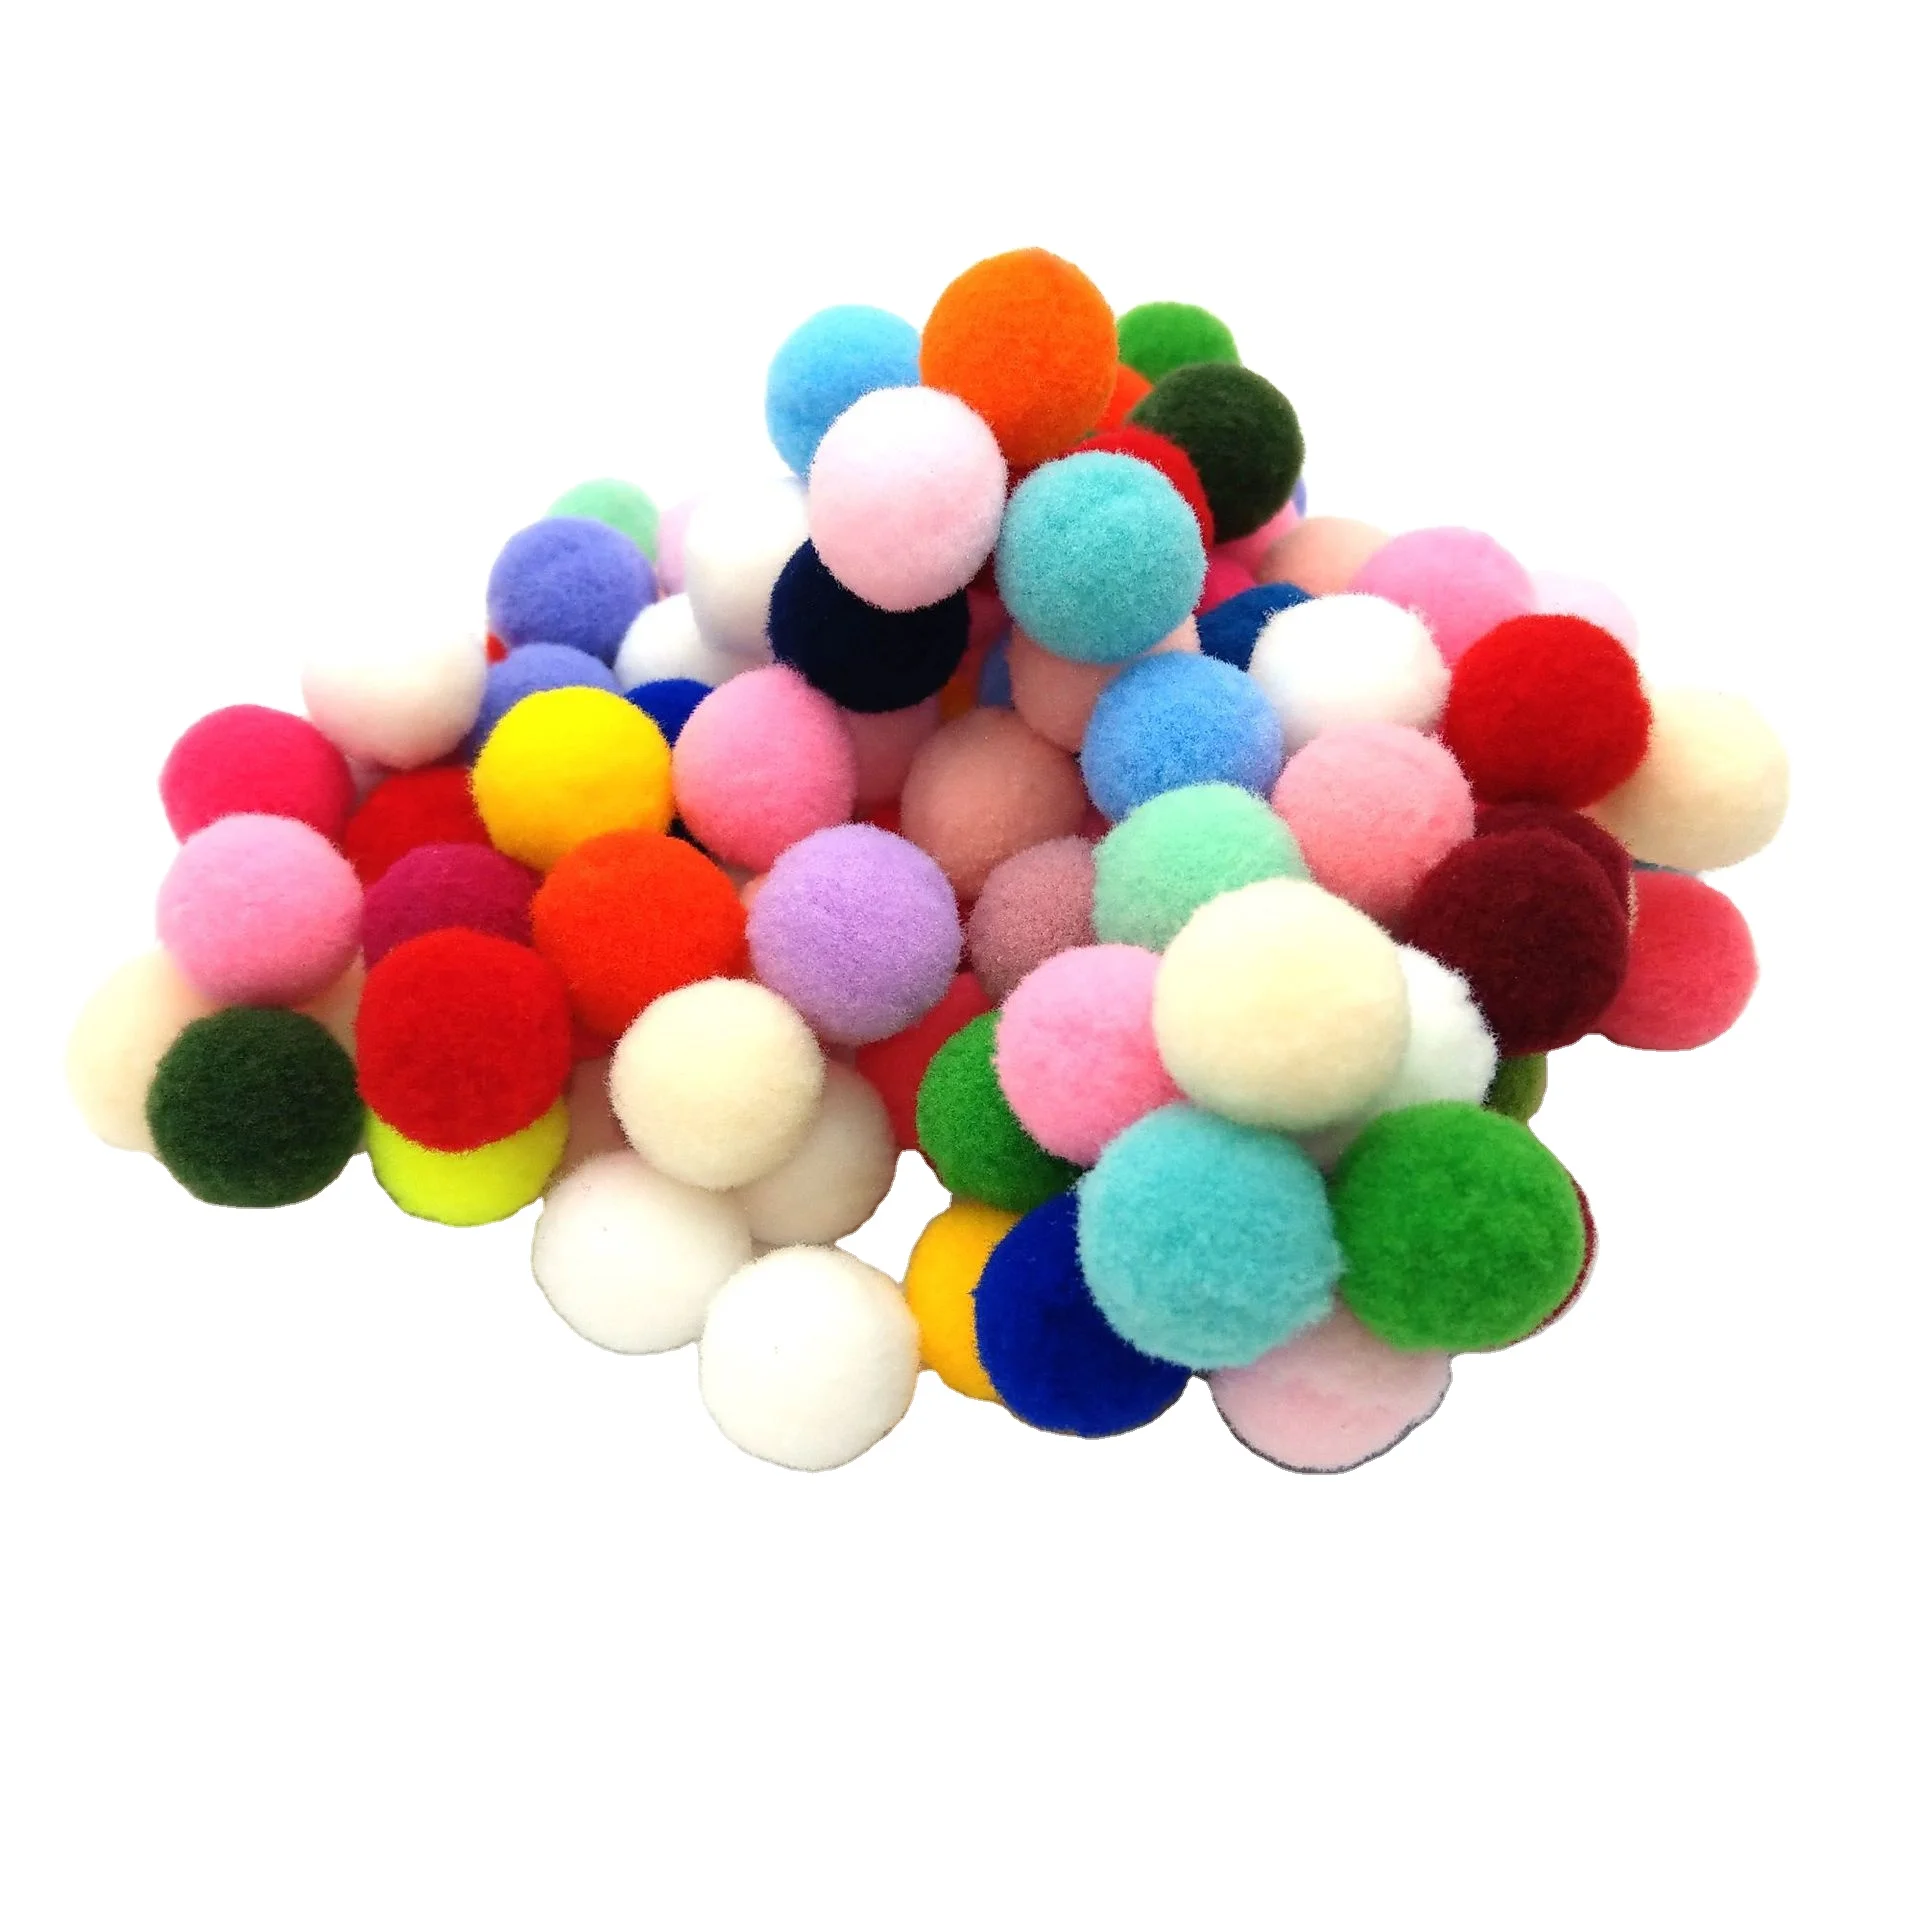 Assorted Pompoms Multicolor Arts And Crafts Fuzzy Poms Balls For Diy Creative Crafts Decorations - Buy Ball,Decorative Balls For Ceiling,Diy Plastic Craft Balls Product on Alibaba.com